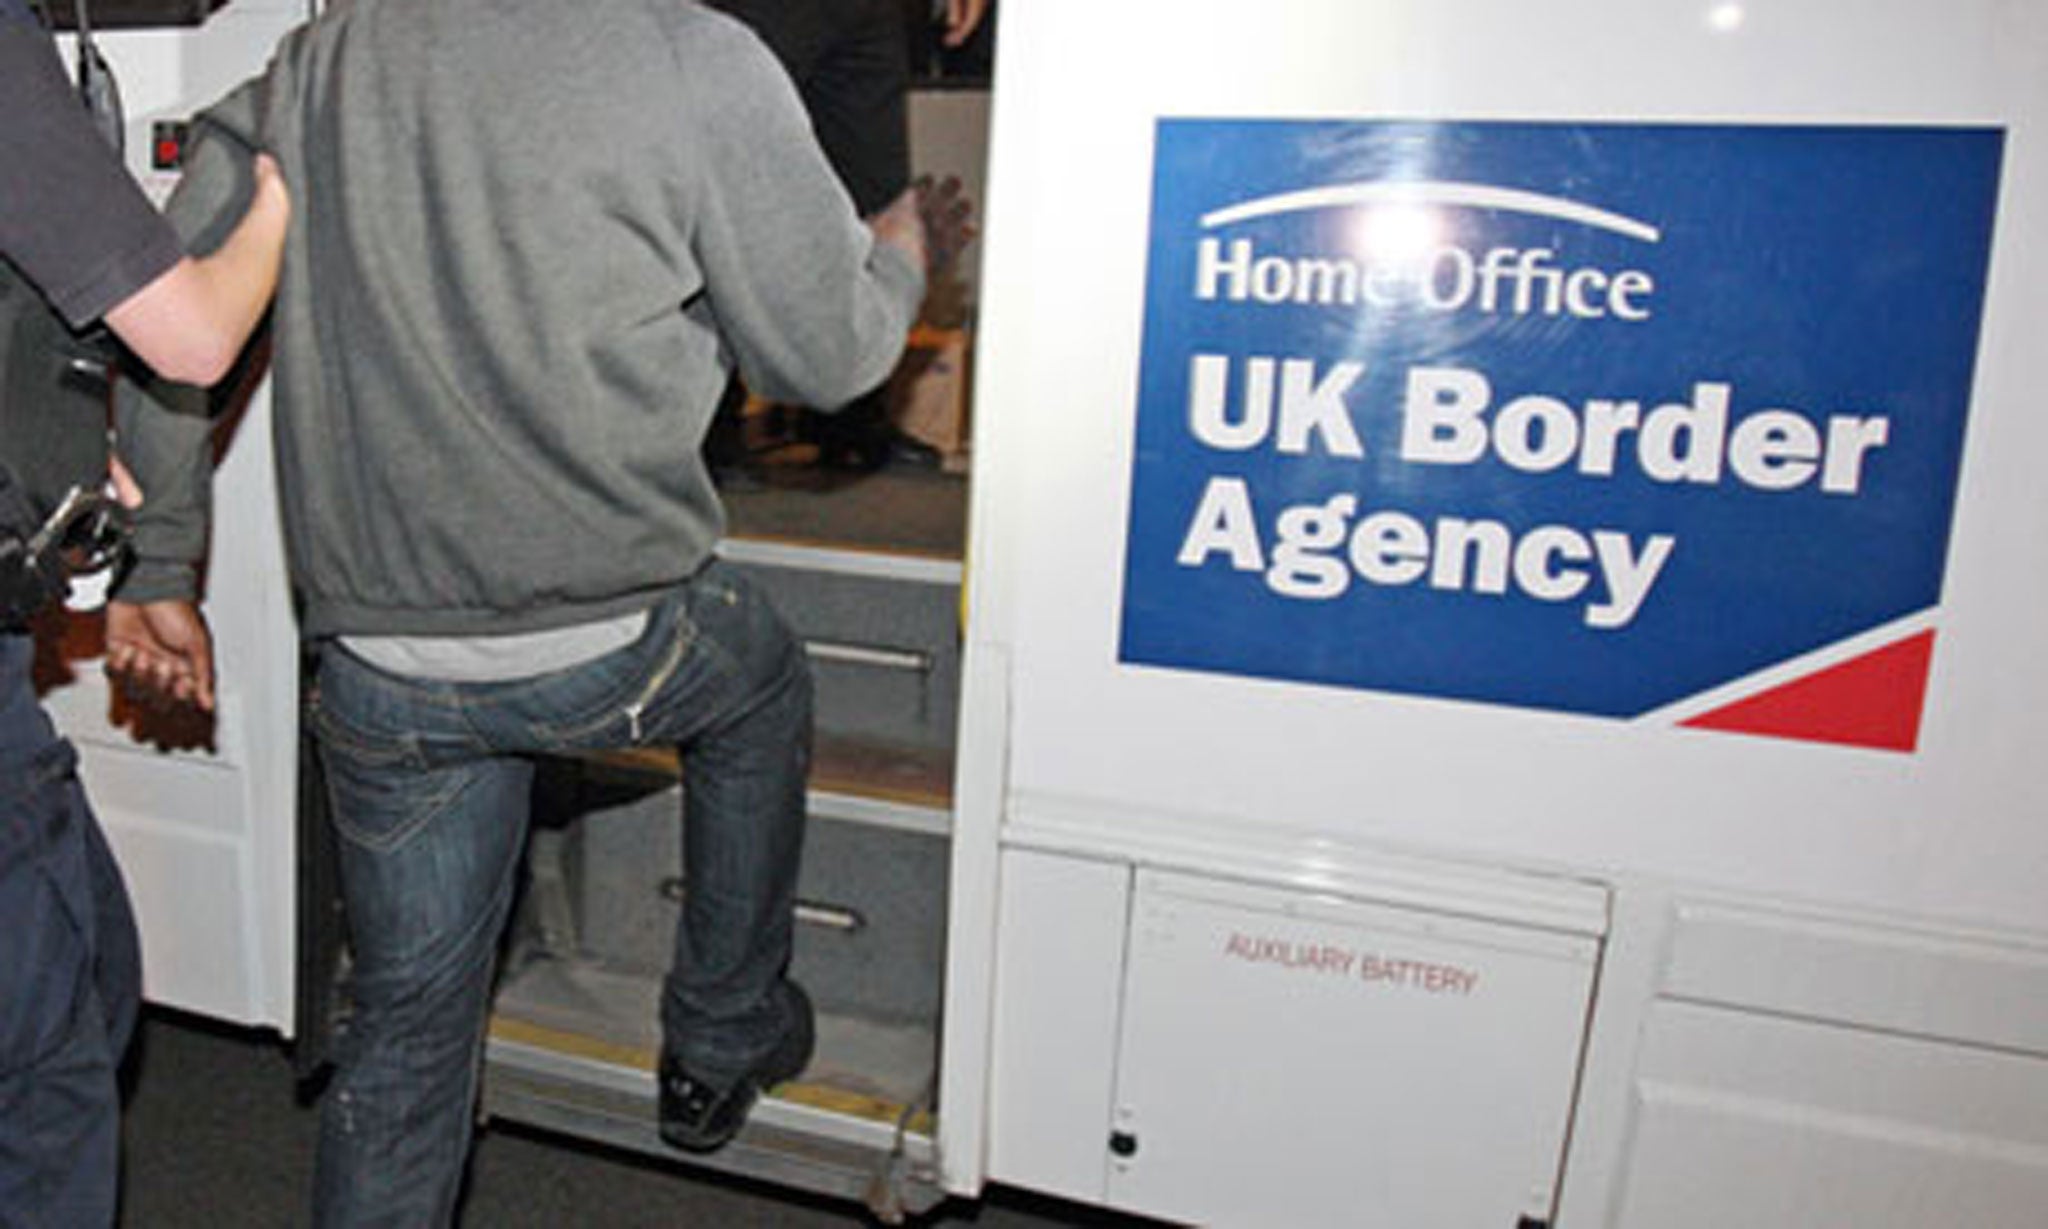 Changes introduced by the UK Border Agency have shifted the emphasis of official assessments to establishing whether or not claimants are genuinely lesbian or gay, according to immigration experts.